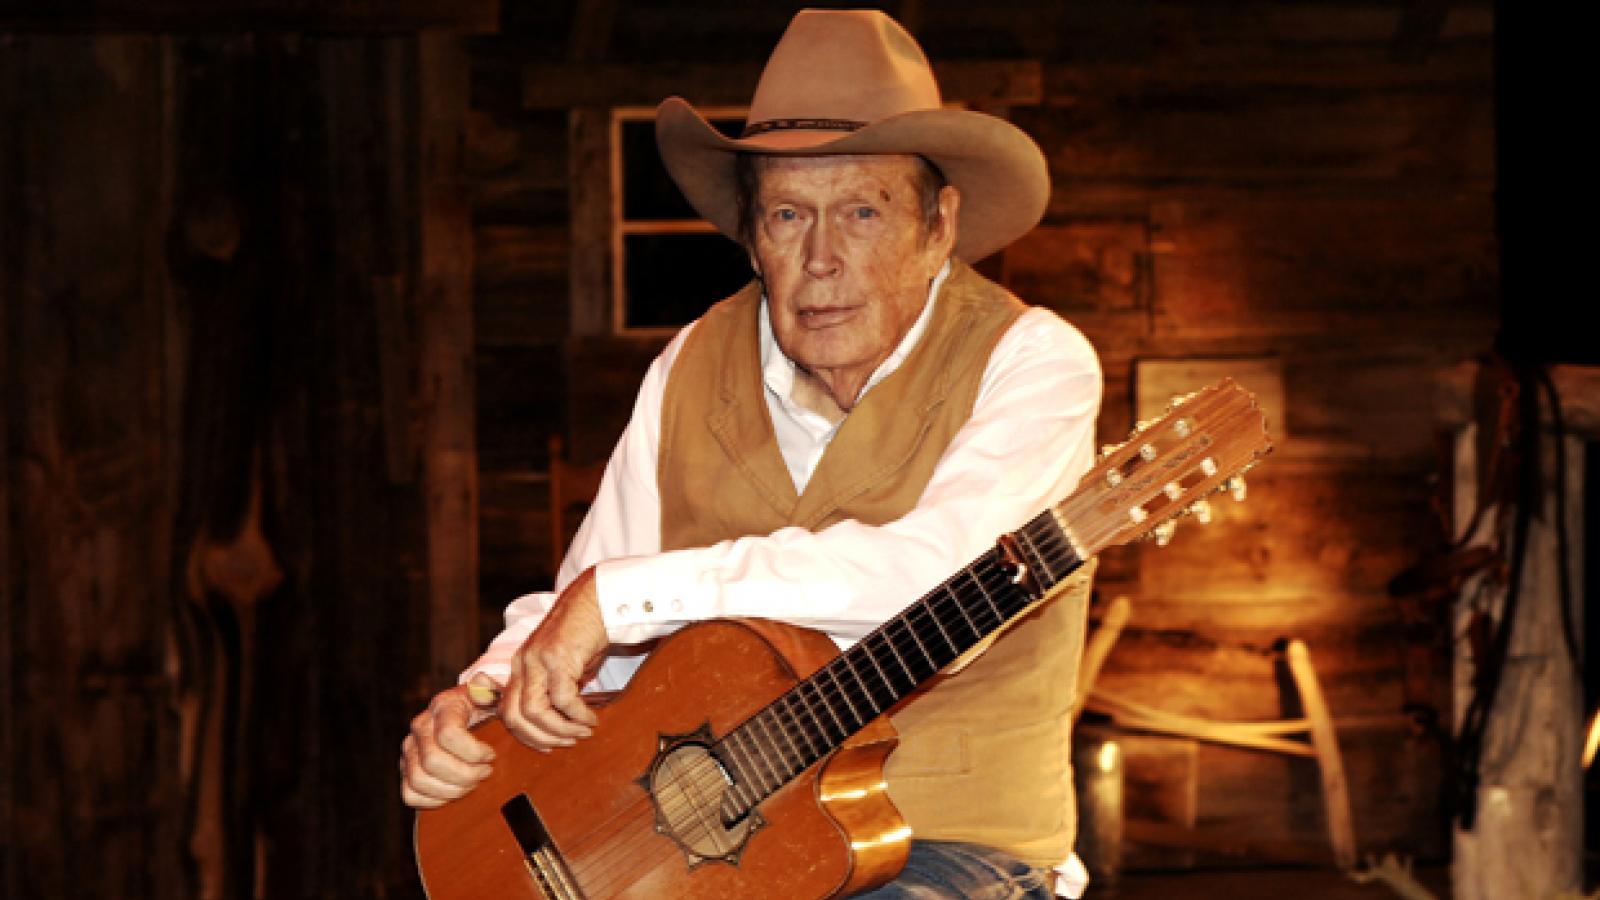 A man in a brown cowboy hat and best sits on a stool, holding a guitar.